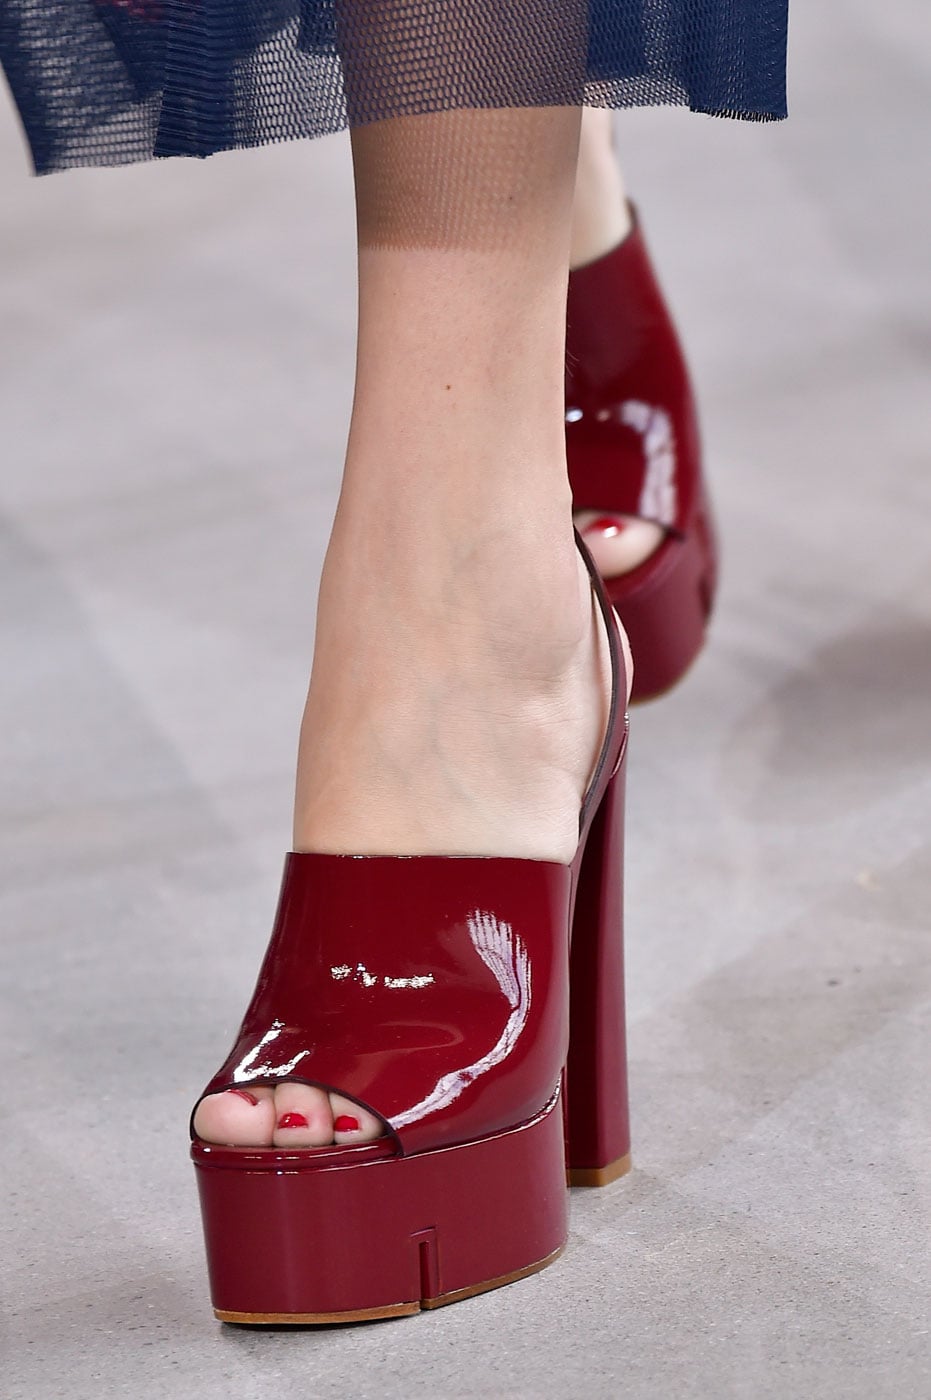 Correspondentie Ruilhandel taart Calvin Klein Spring 2015 | The Best Shoes, Bags, and Baubles on the 2015  Runways (Updated!) | POPSUGAR Fashion Photo 84